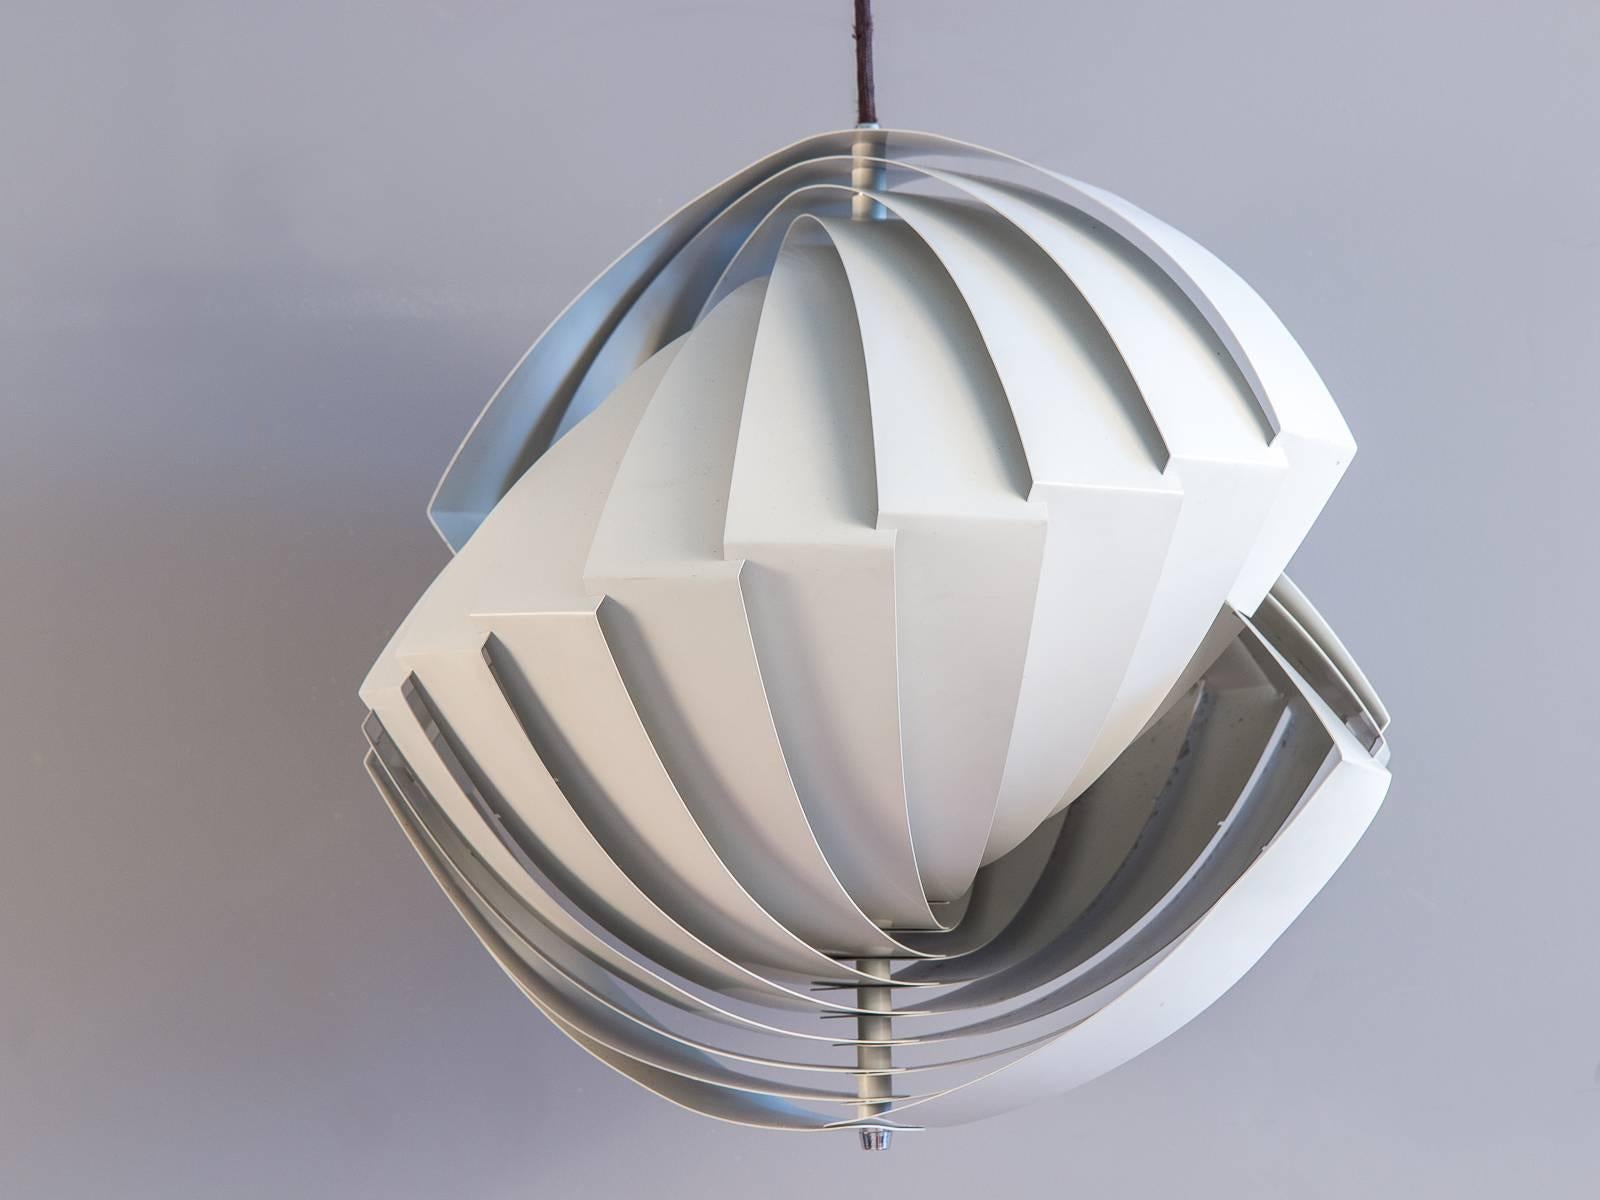 Scarce, elegant, hanging pendant light by Louis Weisdorf for Lyfa. Danish for "conch," the Konkylie follows the shell's form, resulting in this stunning, functional sculpture. Smartly designed to reduce glare, and emits a soft luminous